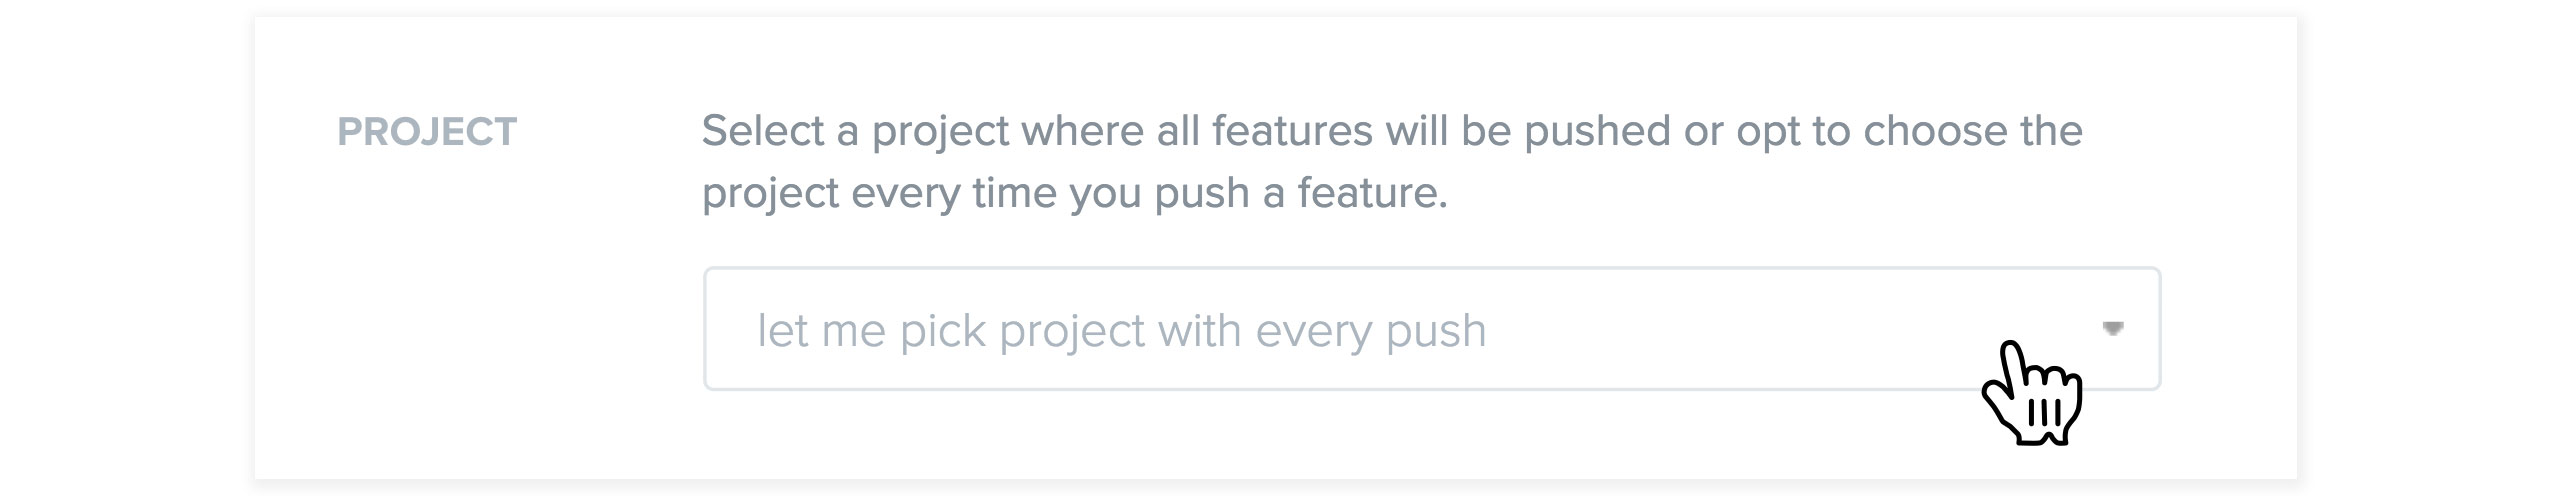 productboard-let-me-pick-jira-proj-with-every-push.jpg